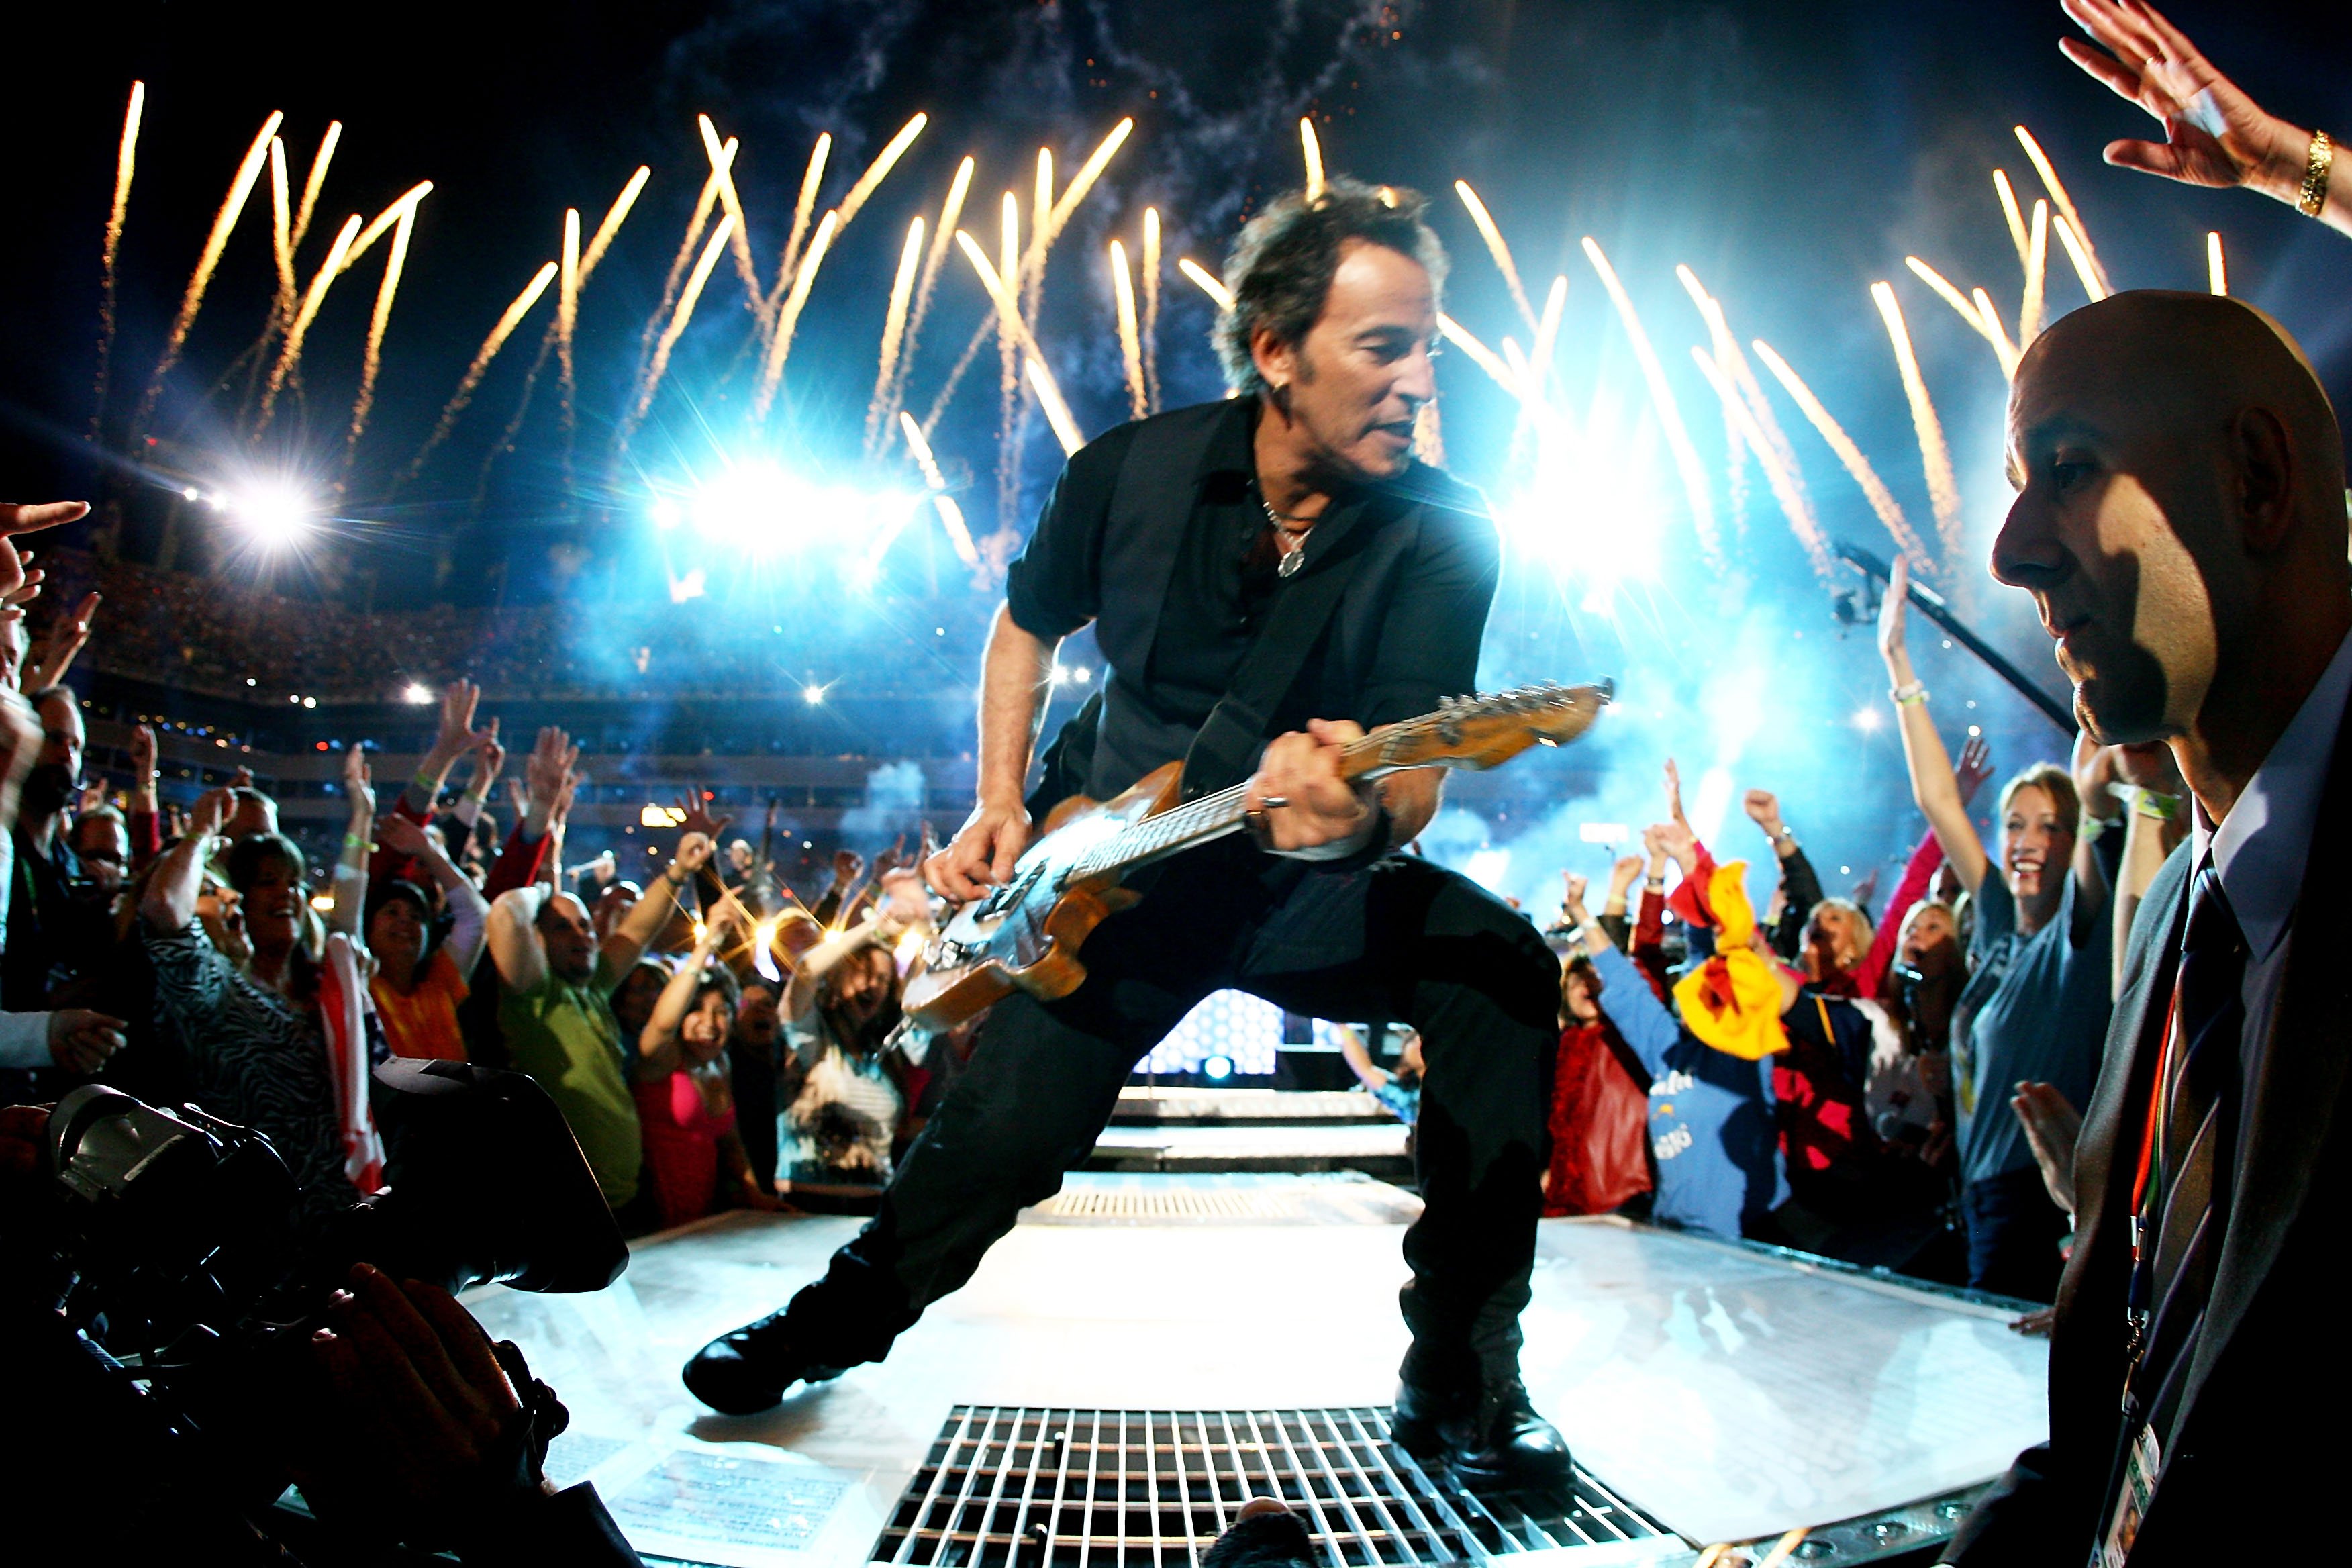 Musician Bruce Springsteen and the E Street Band perform at the Bridgestone halftime show during Super Bowl XLIII